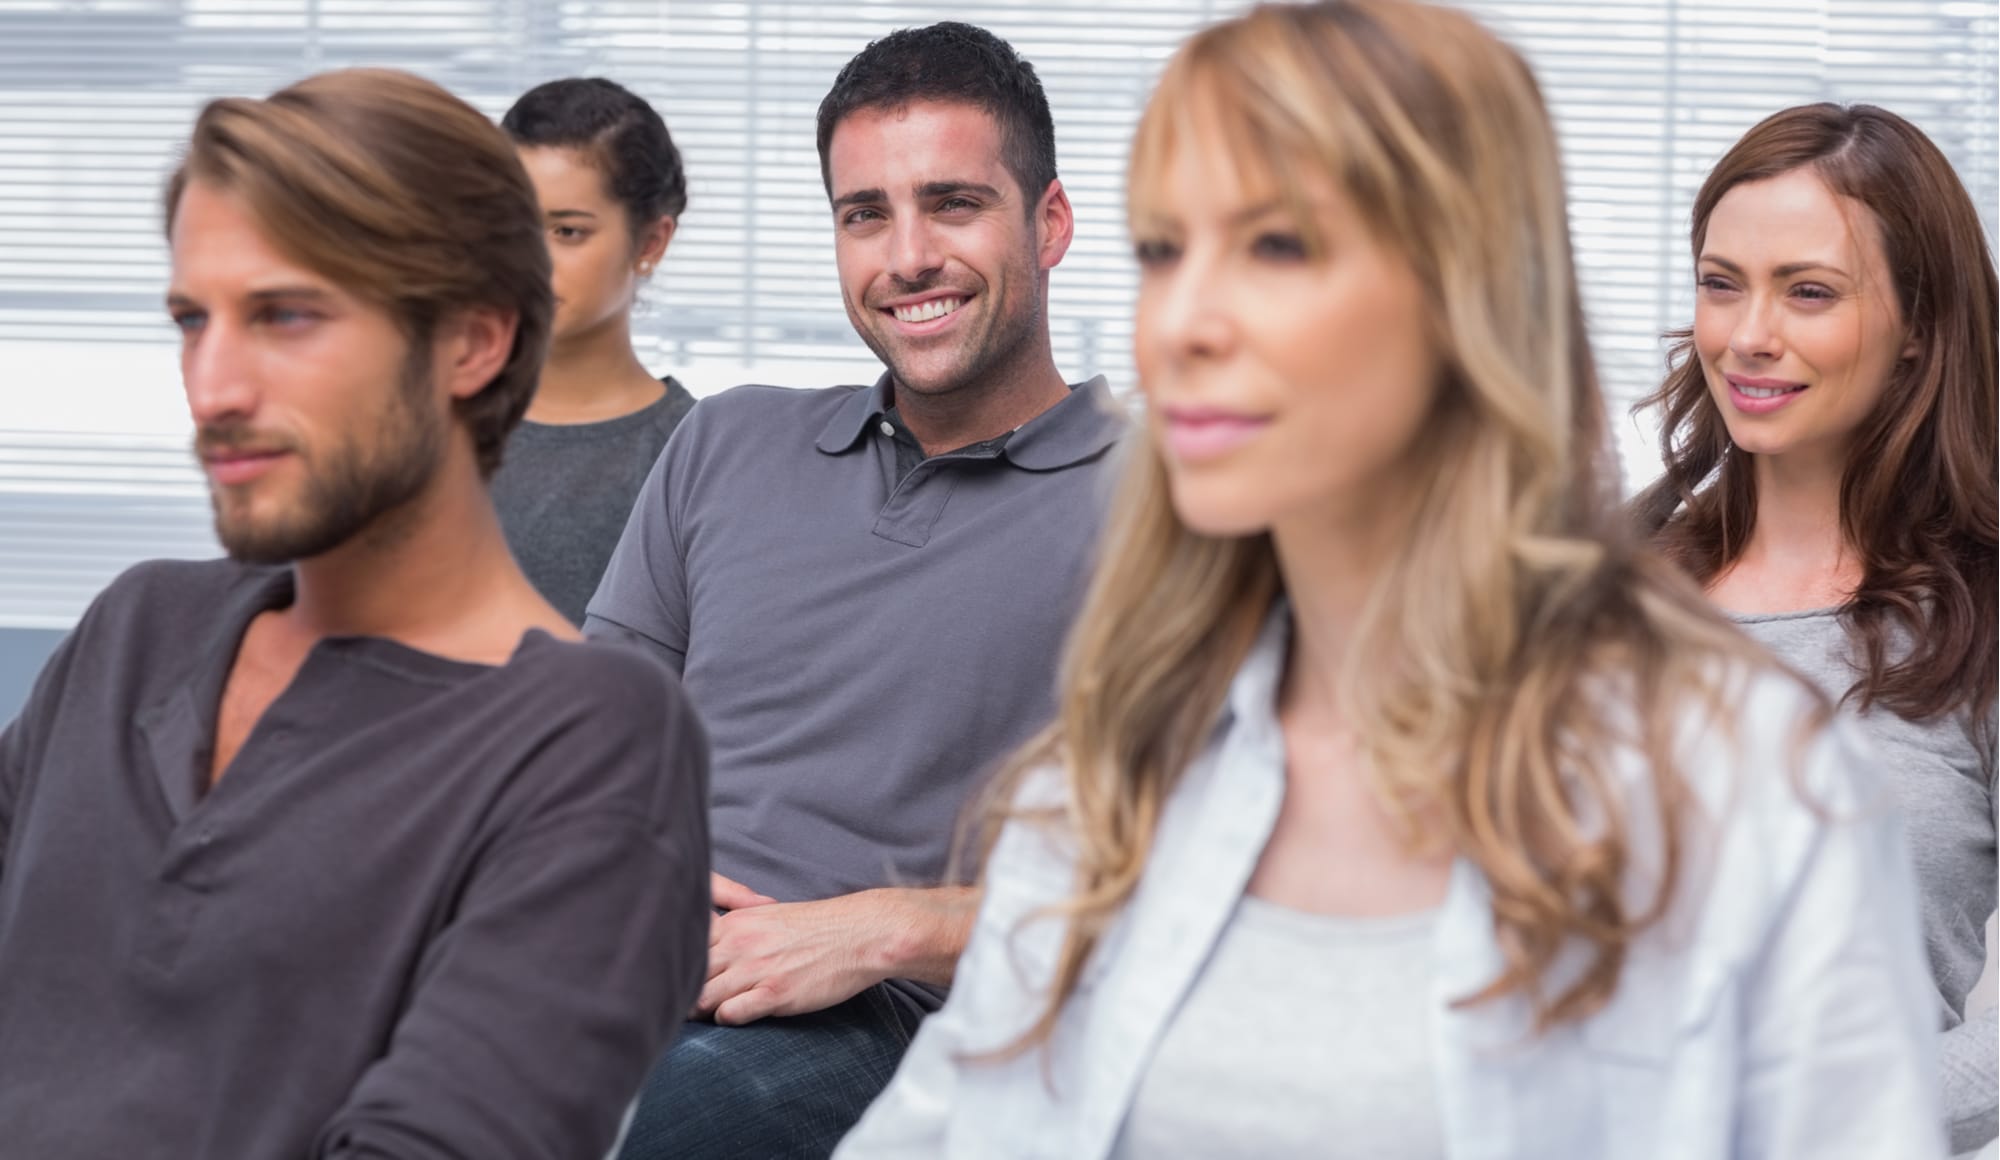 Is Outpatient Rehab Right For You? Pathfinders Recovery Center - A group of individuals that searched "outpatient rehabs near me," is attending a group therapy session as part of their outpatient treatment programs.